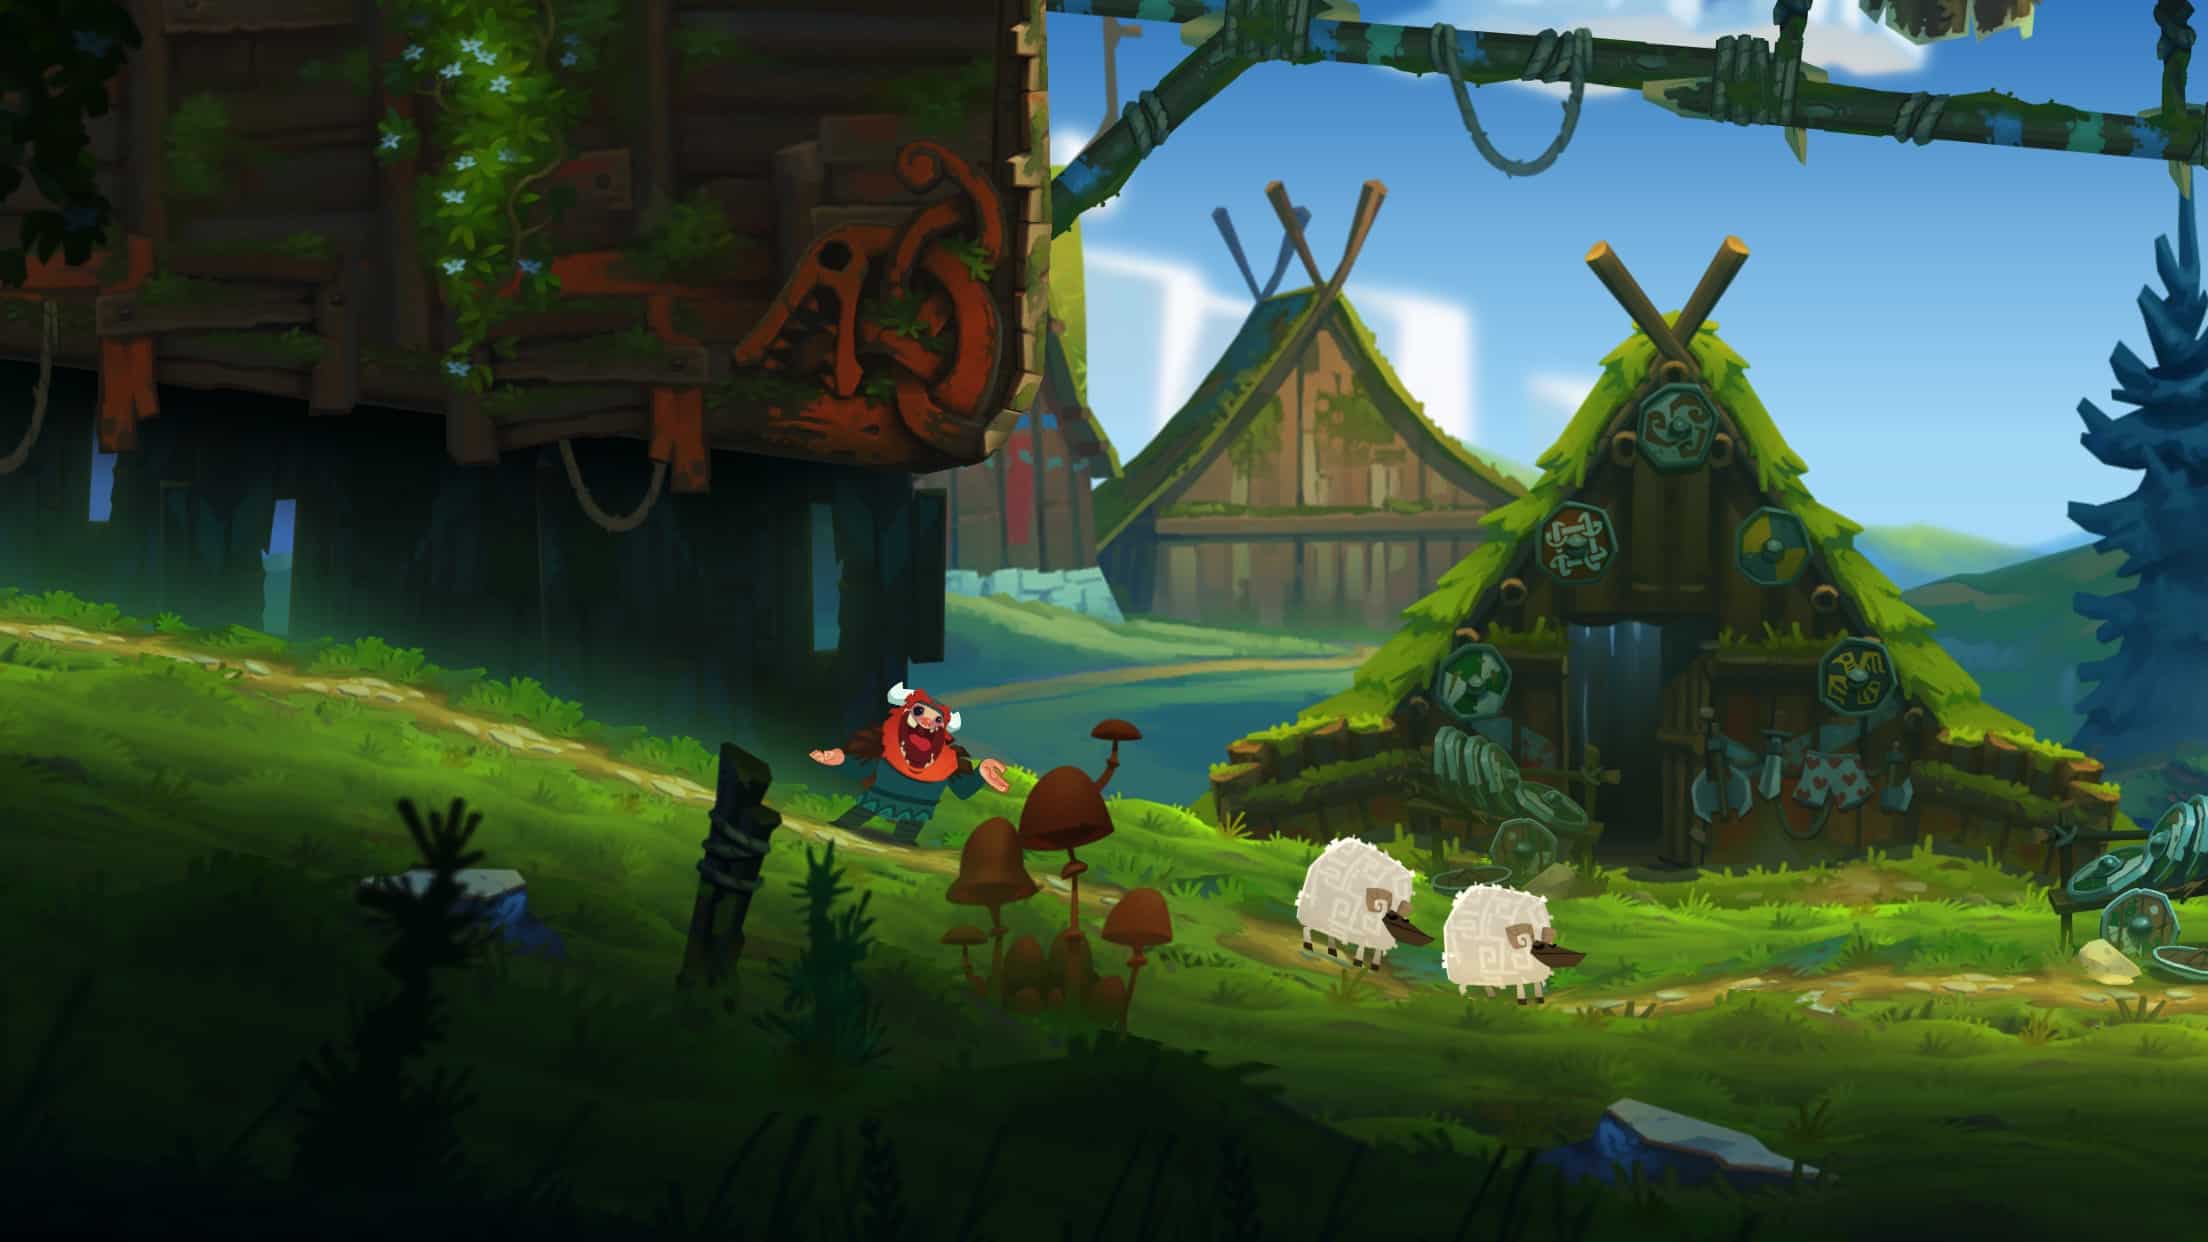 Oddmar Is A Viking Themed Platformer From The Makers Of Leo's Fortune. Cult Of Mac